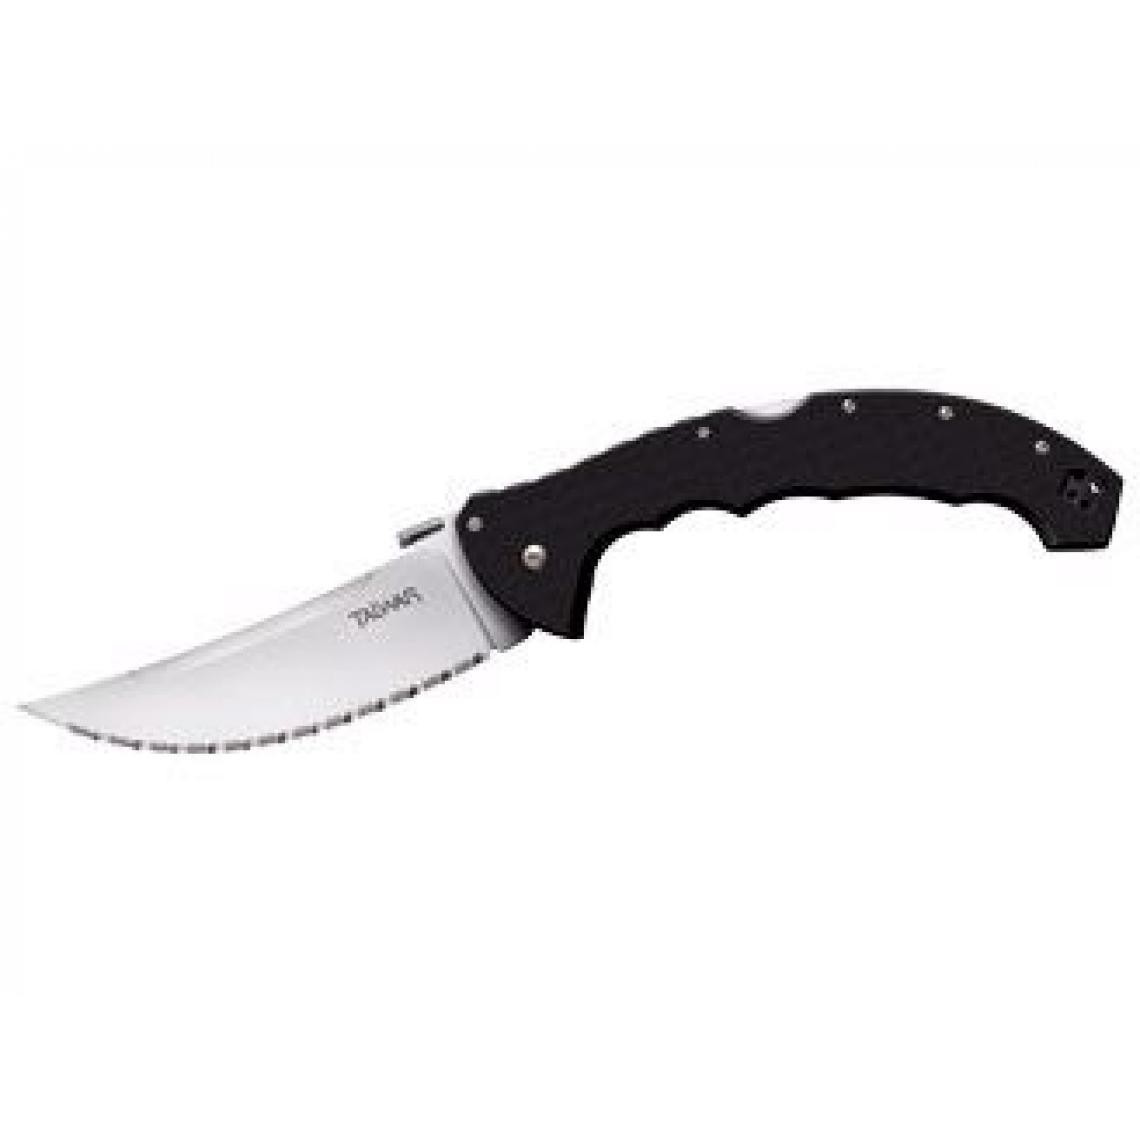 Divers Marques - Cold Steel TALWAR 5.5" S35VN SERRATED 21TBXS - Outils de coupe